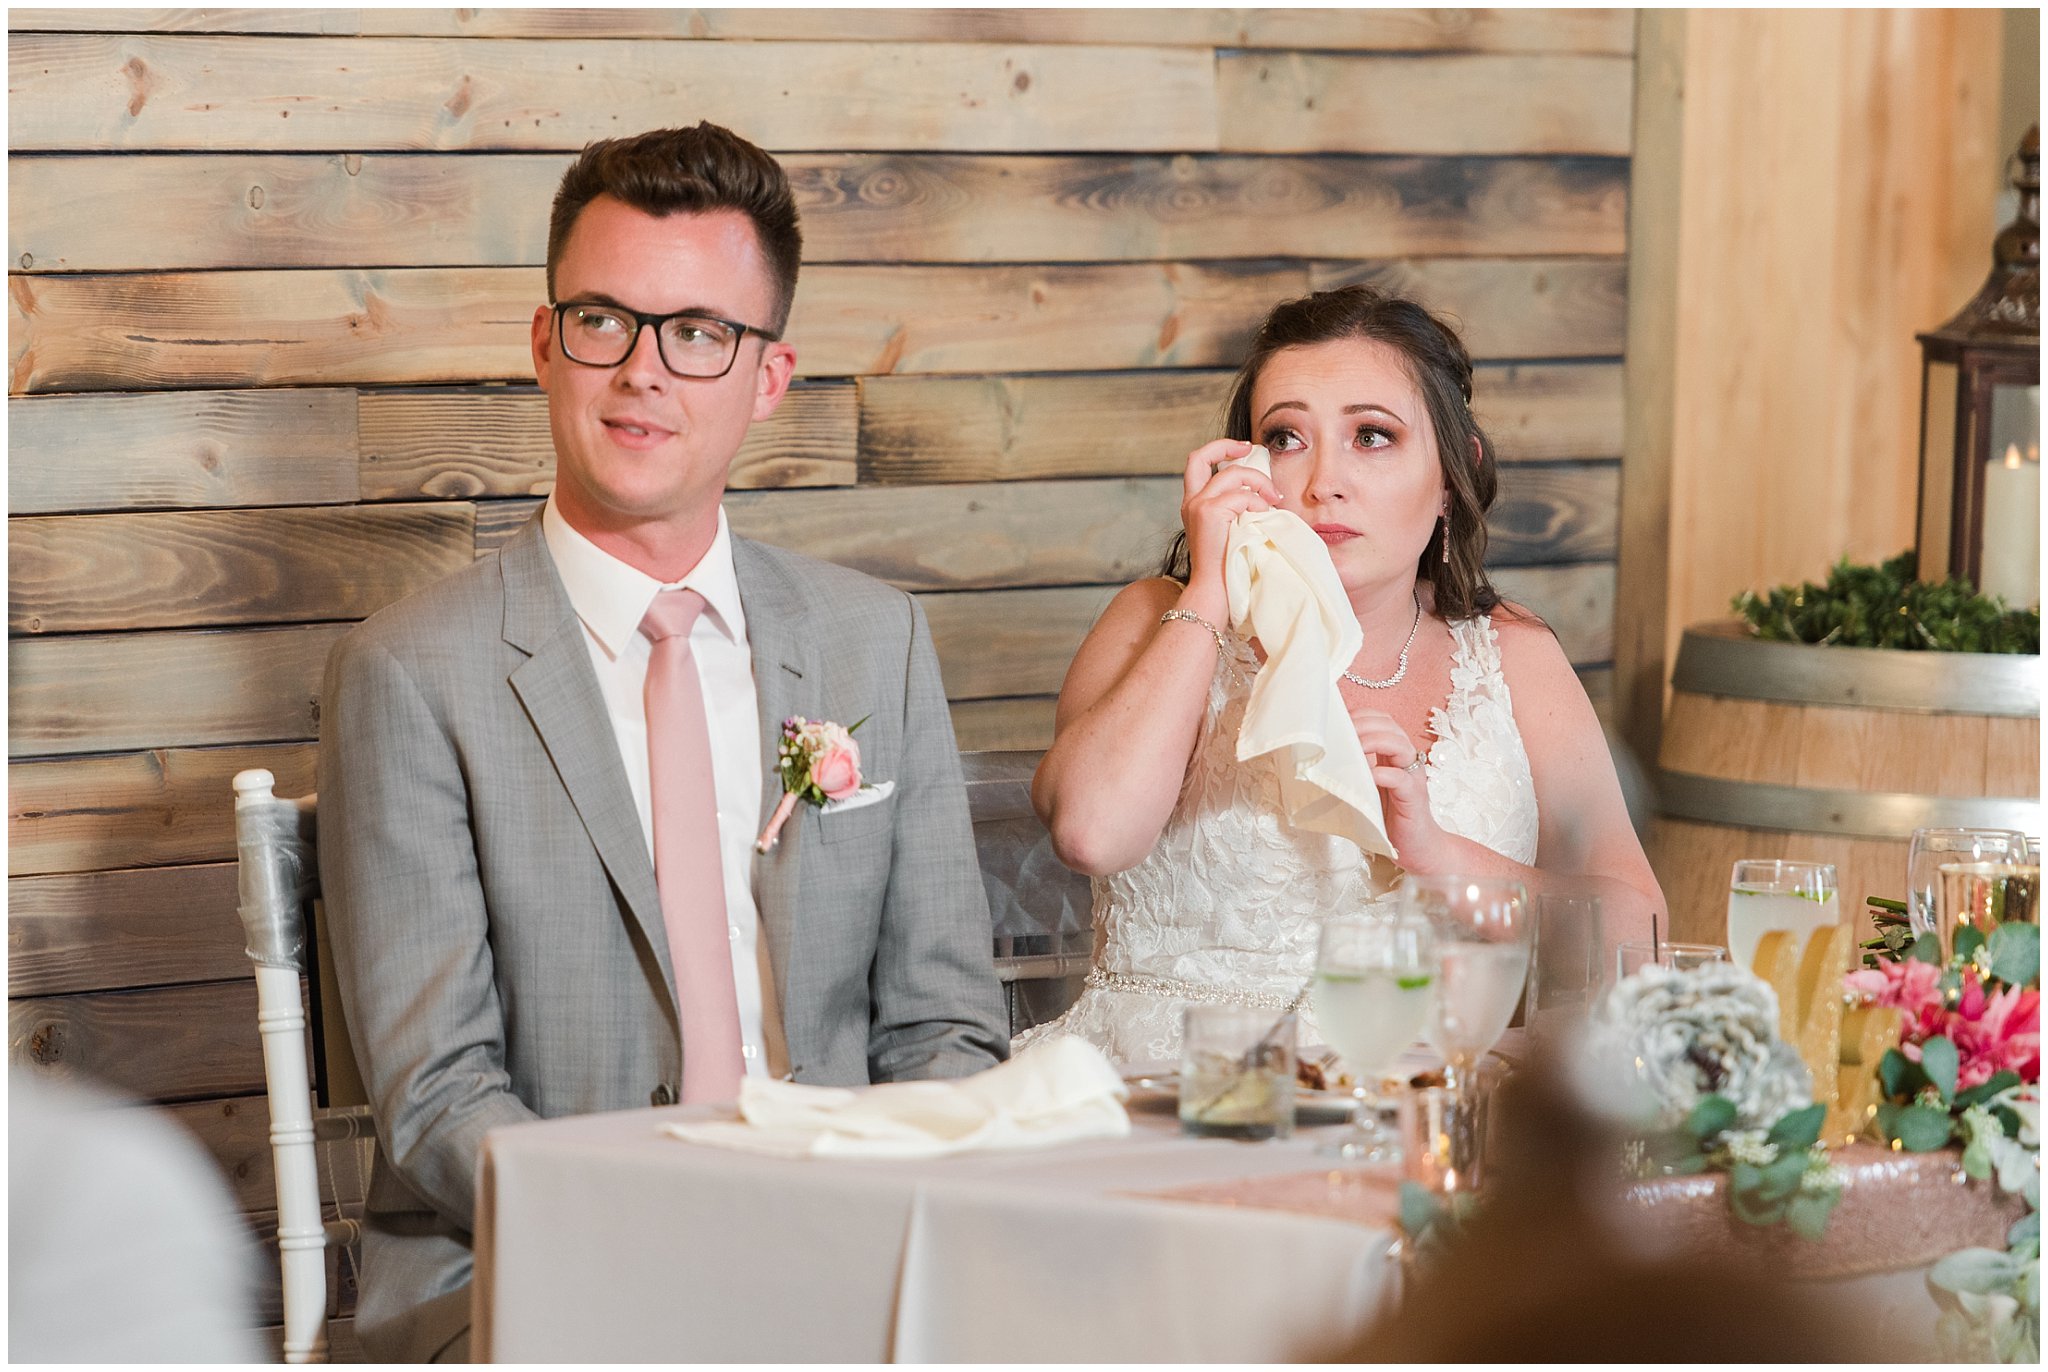 Bride and groom during toasts at dinner | Oak Hills Utah Dusty Rose and Gray Summer Wedding | Jessie and Dallin Photography